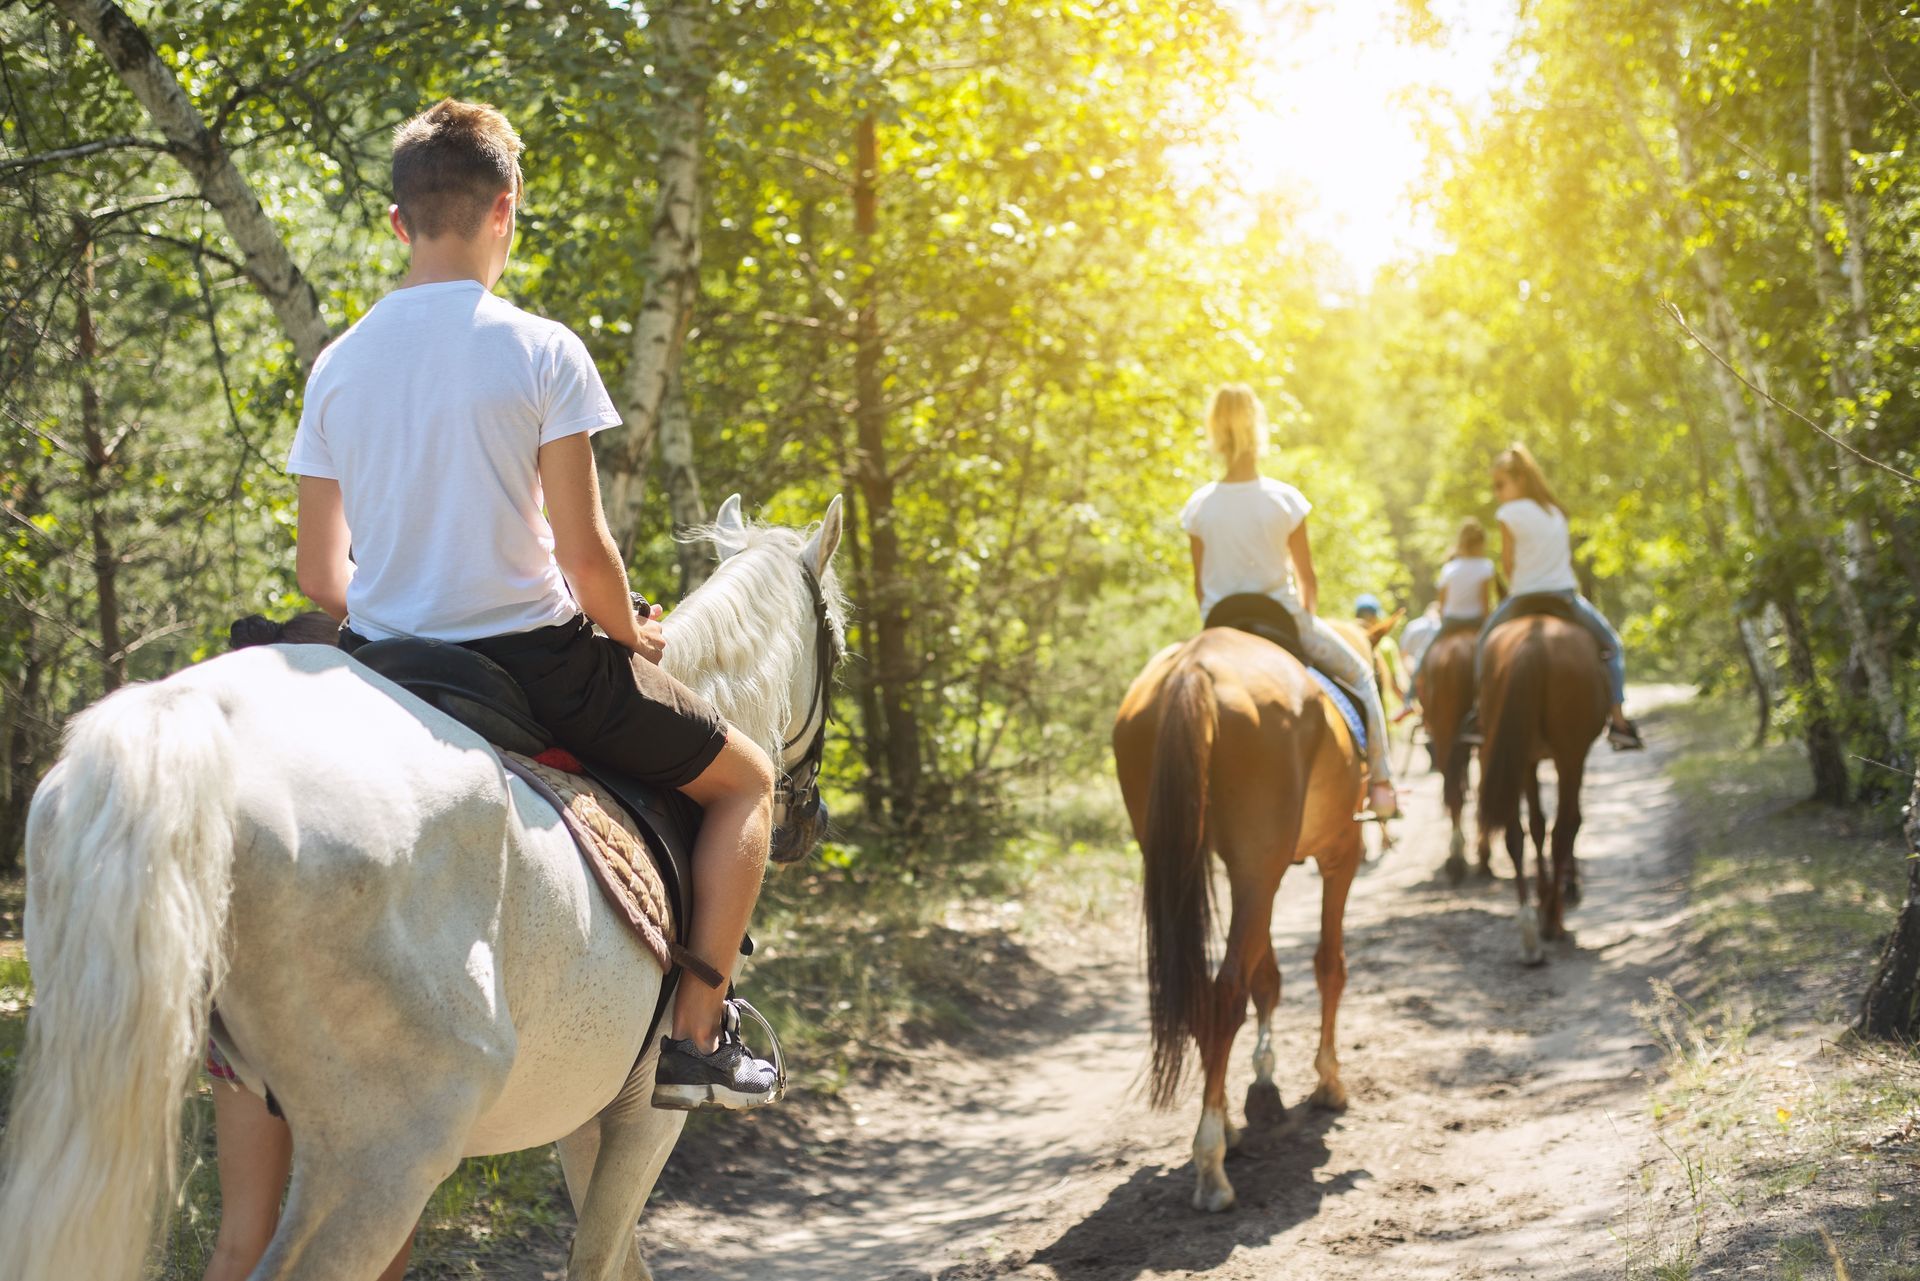 a group of people are riding horses down a dirt path in the woods .